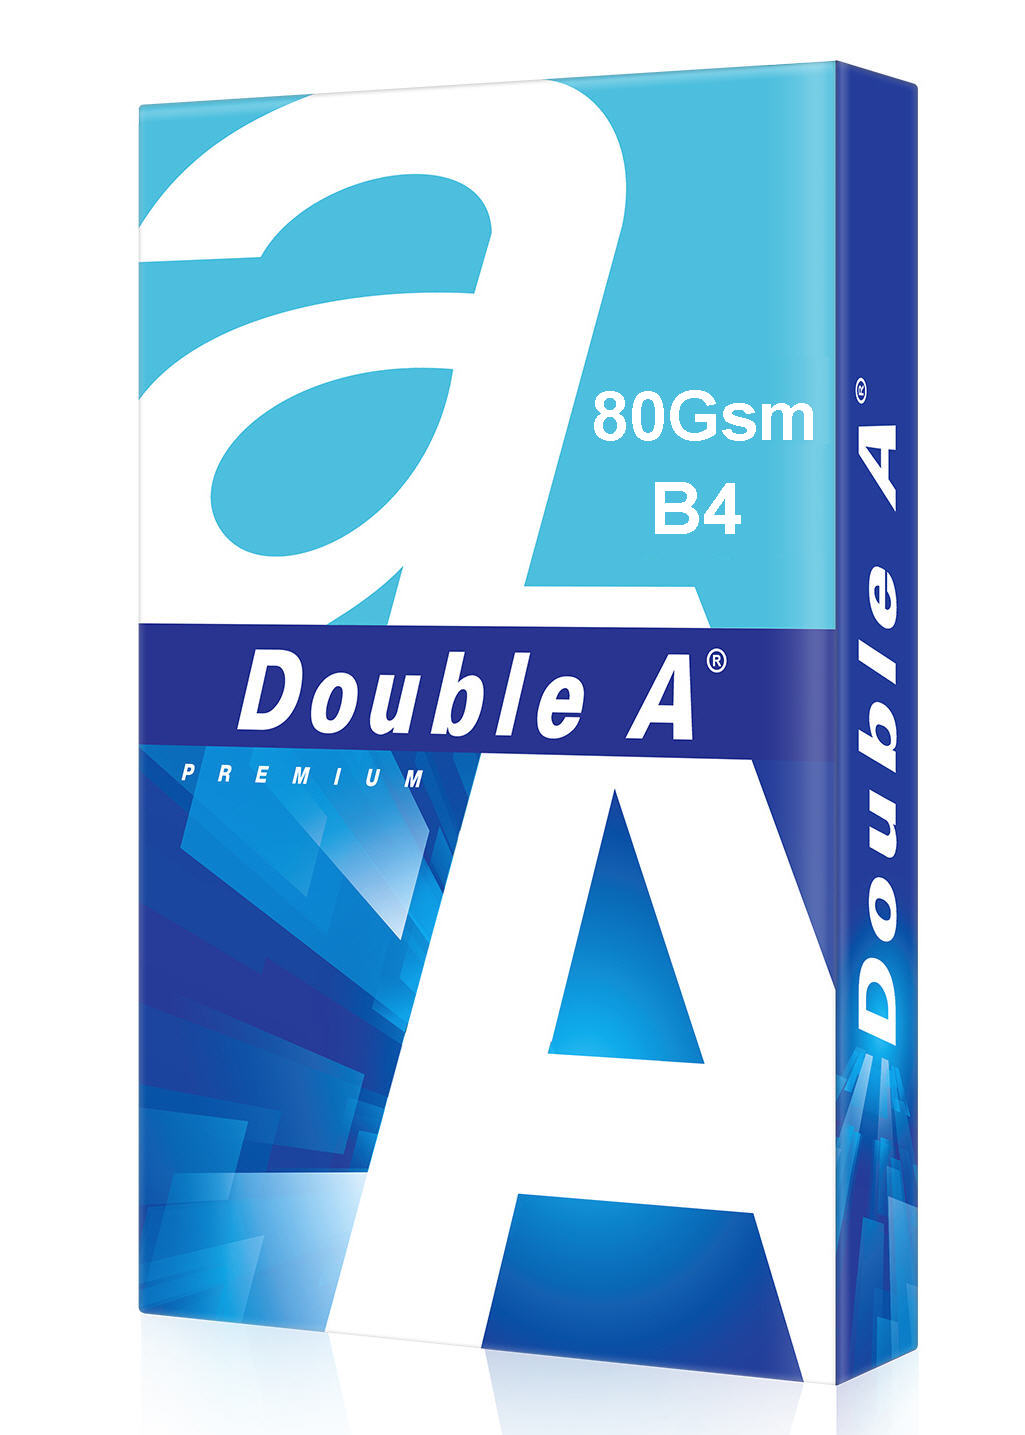 Double A 80Gsm B4